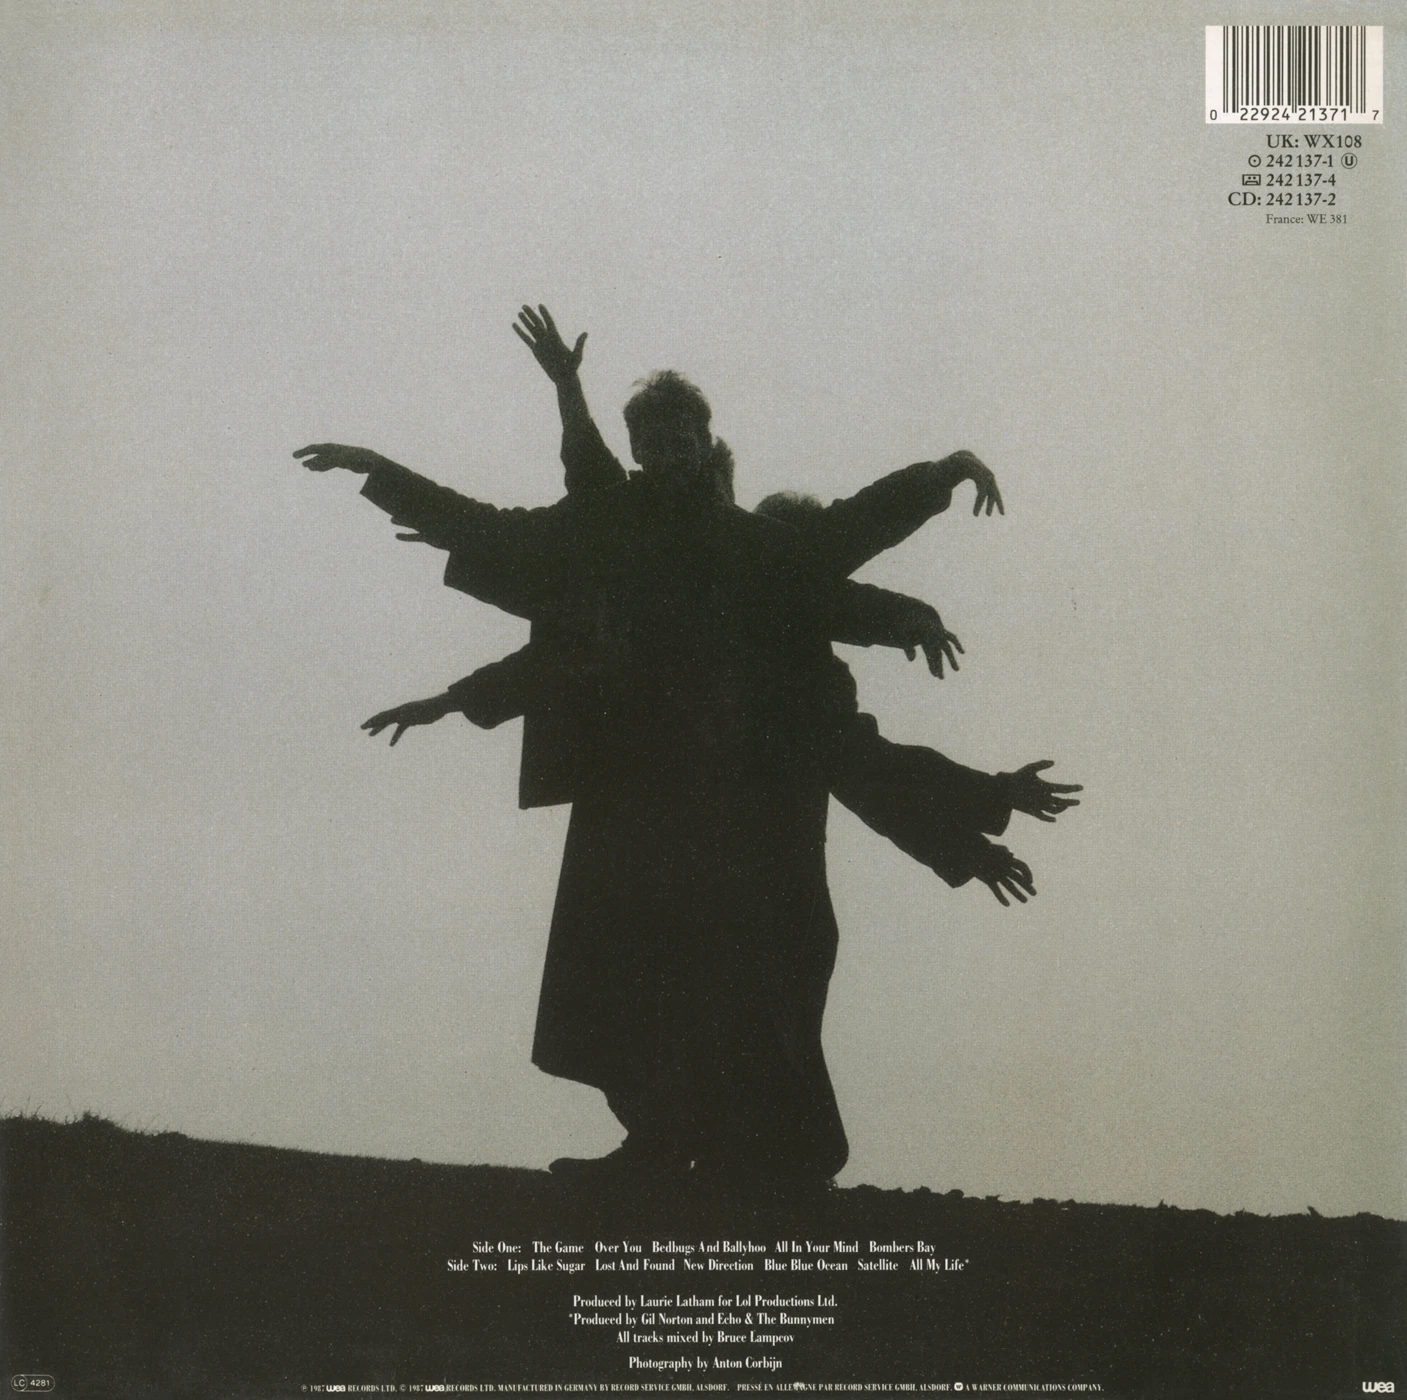 Echo & The Bunnymen back cover